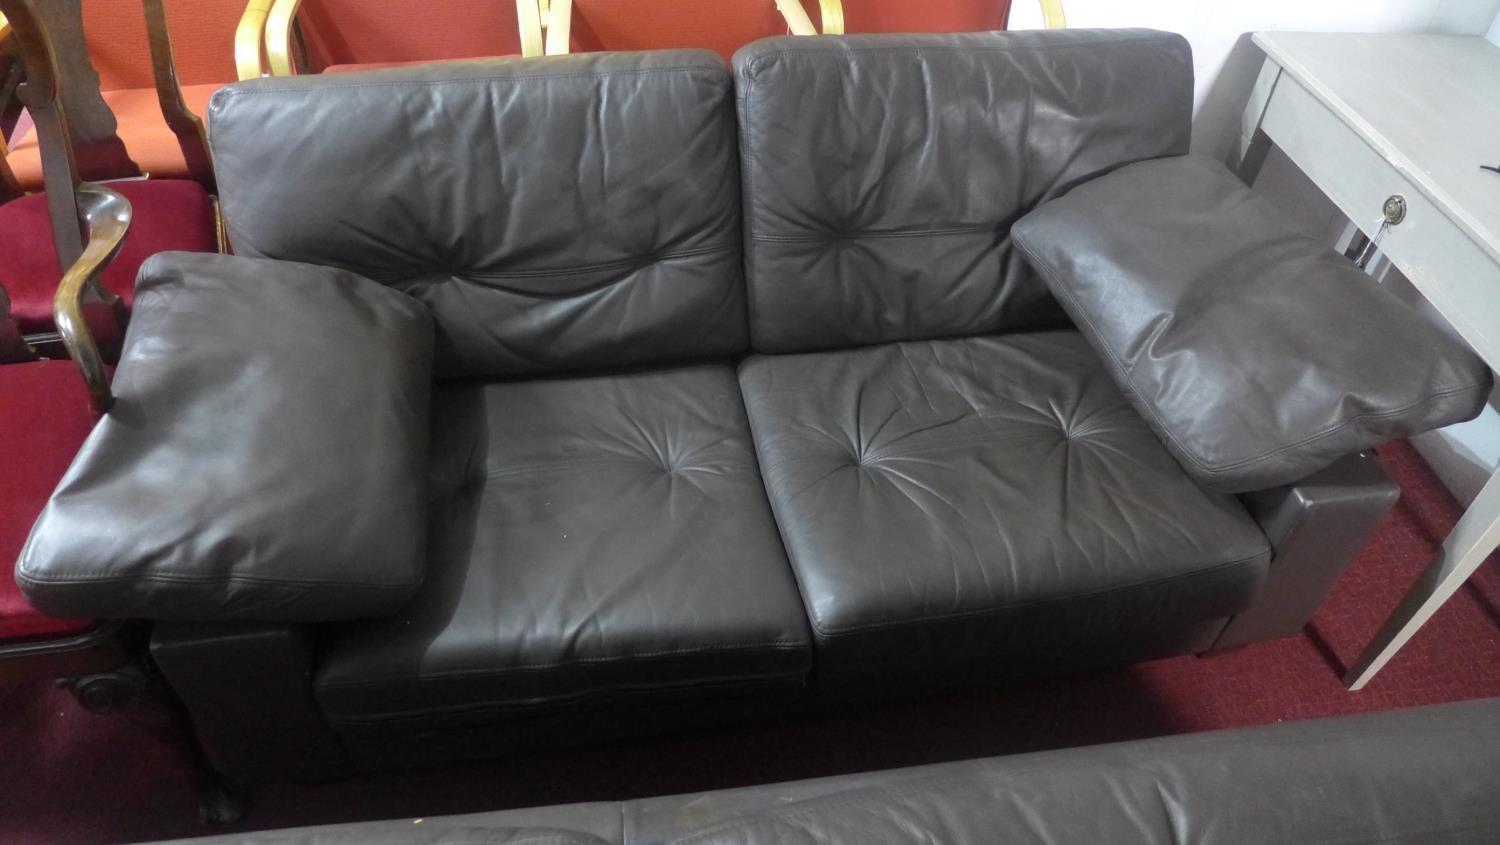 A Heal's brown leather 2 seat sofa